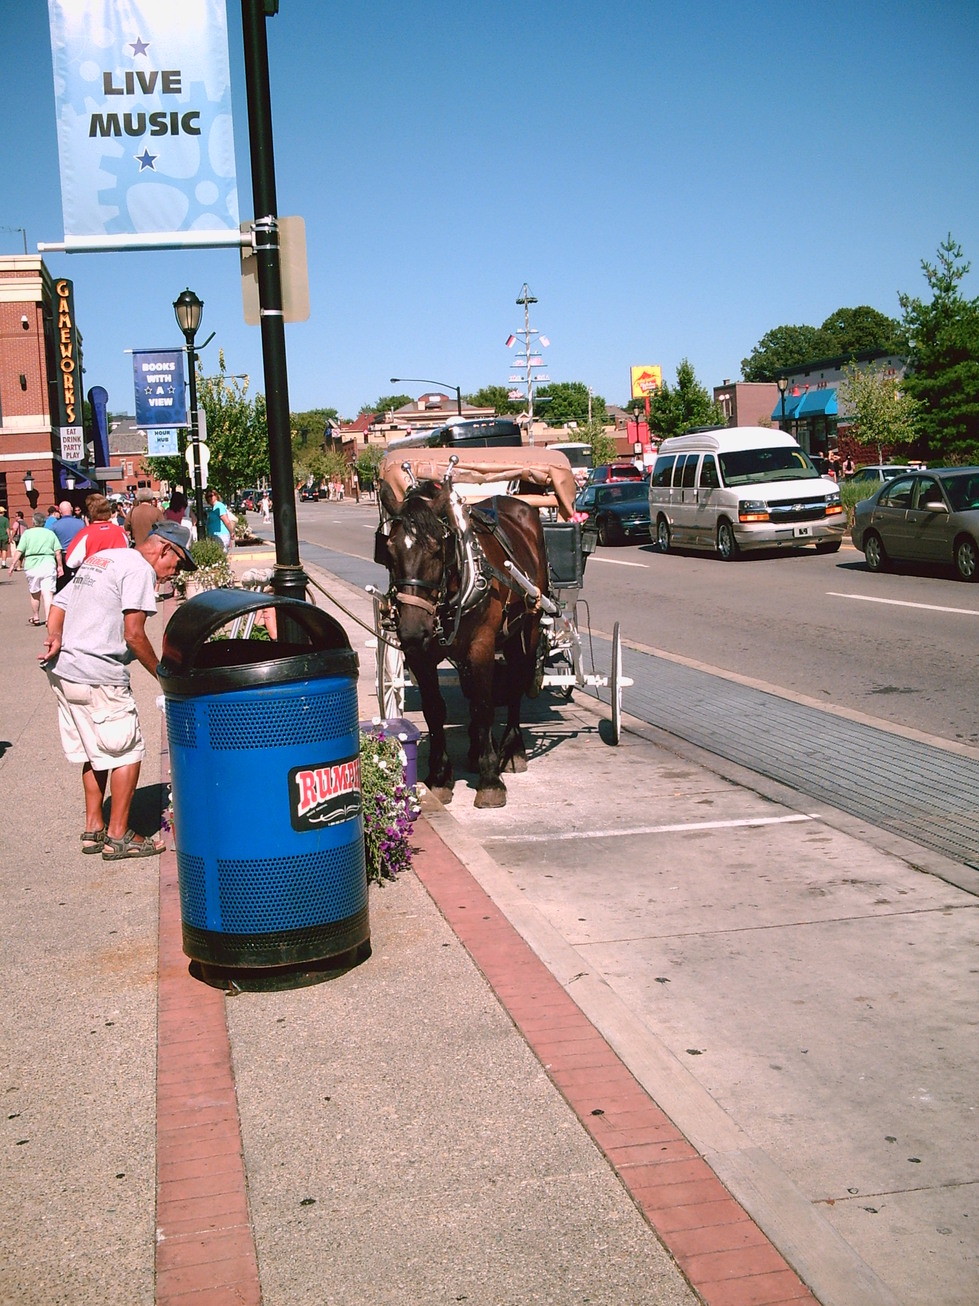 Newport, KY: A horse and buggy in downtown Newport, Kentucky